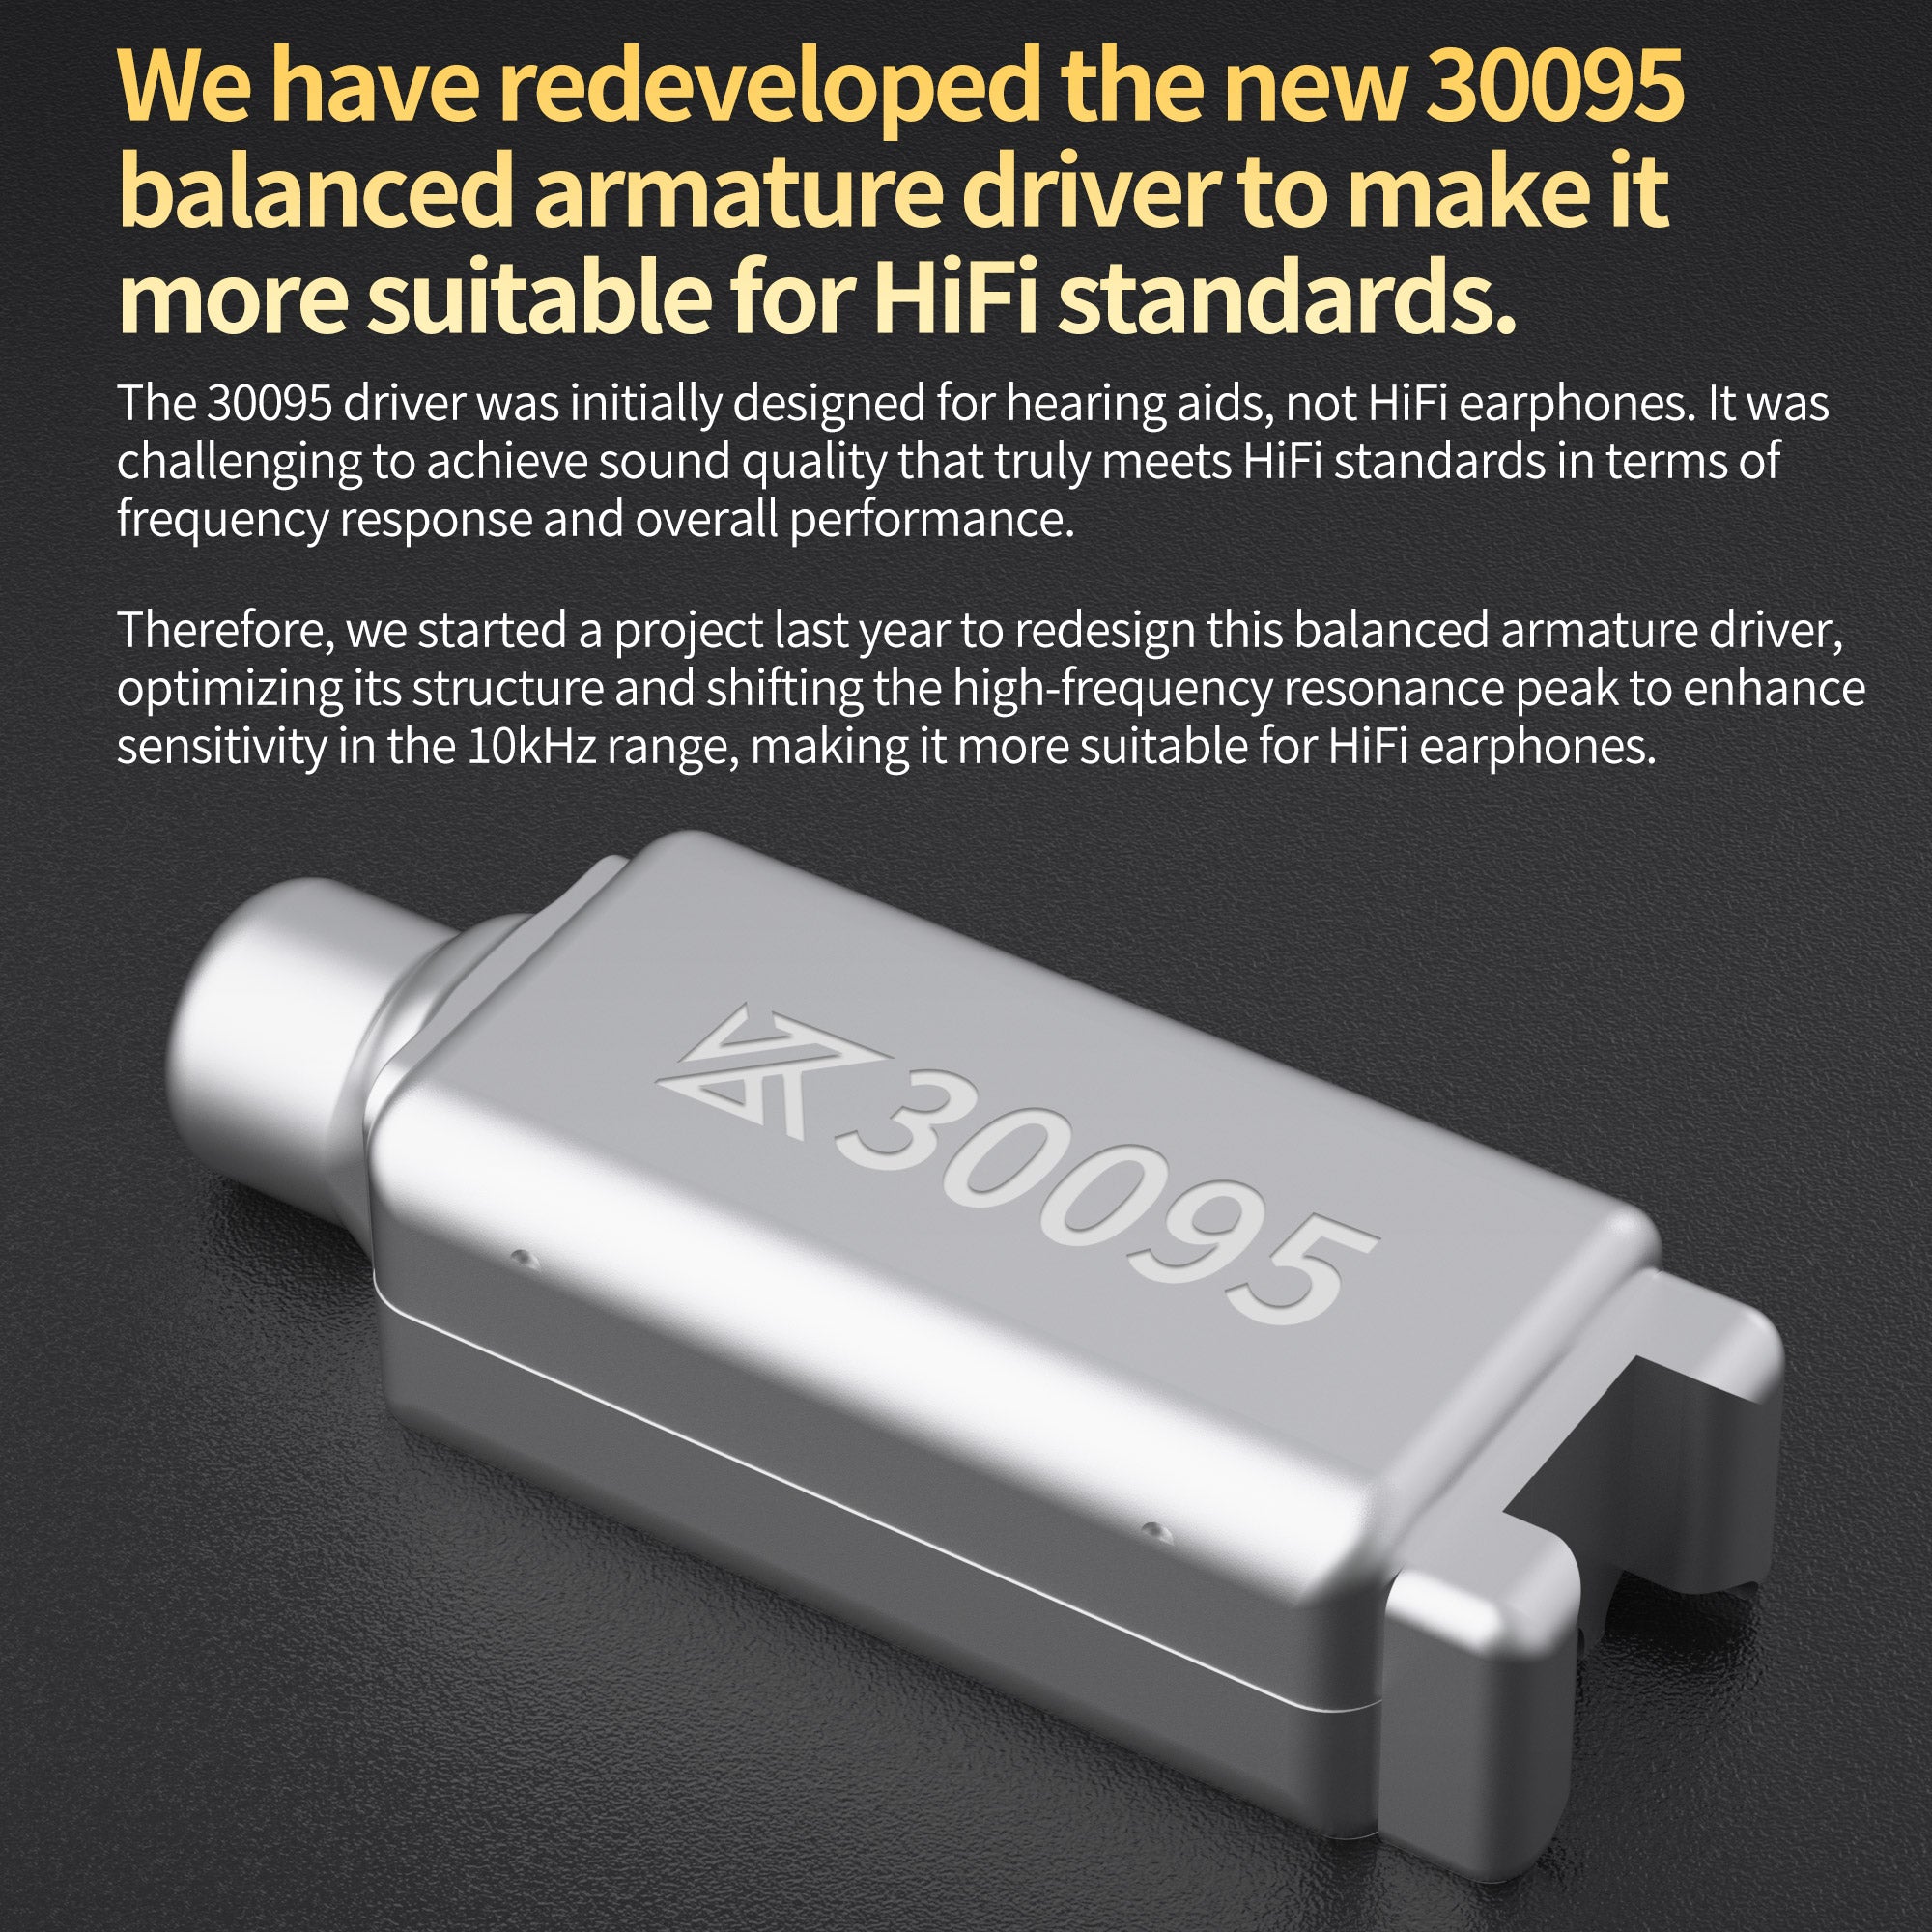 We have redeveloped the new 30095 balanced armature driver to make it more suitable for HiFi standards.